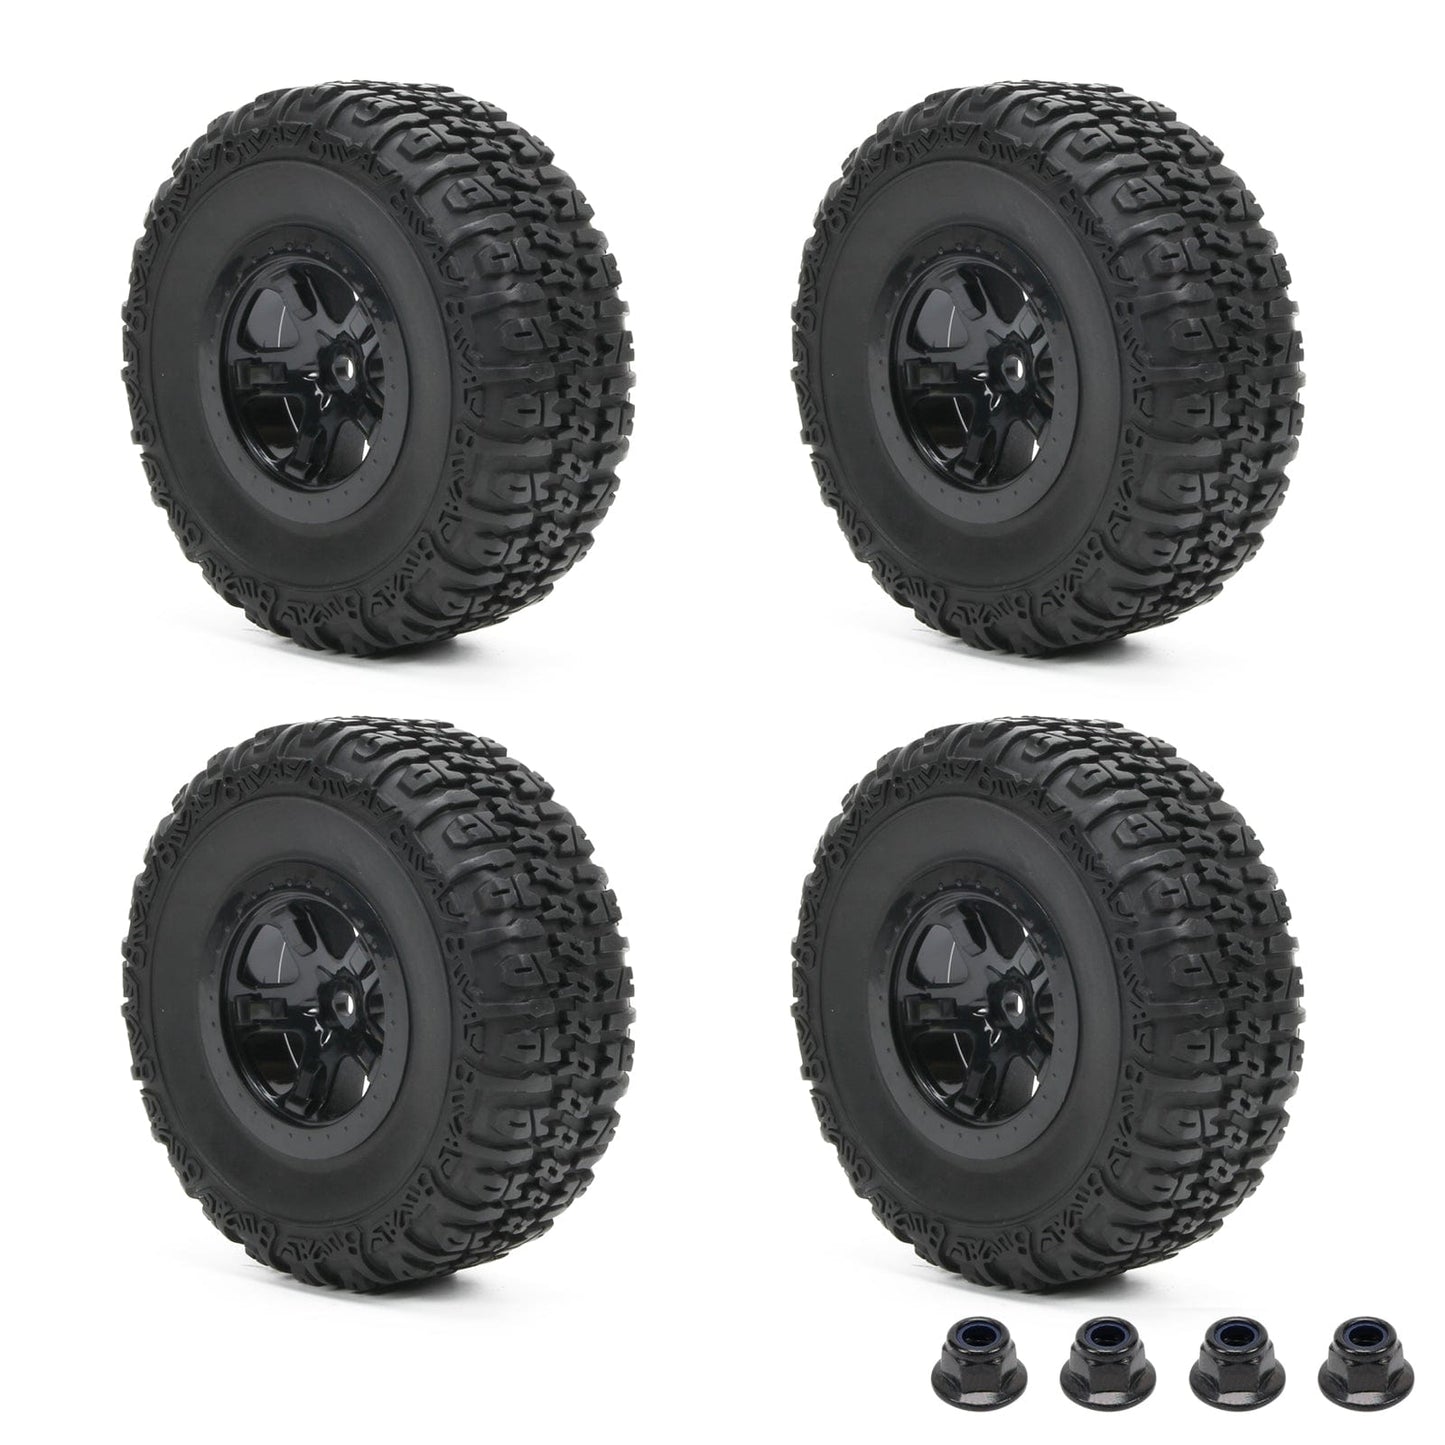 RCAWD LOSI Baja Rey 4WD RCAWD Losi Baja Rey 4WD Upgrades Alpine Front/Rear 2.2/3.0 Pre-Mounted 5 Spokes Tires